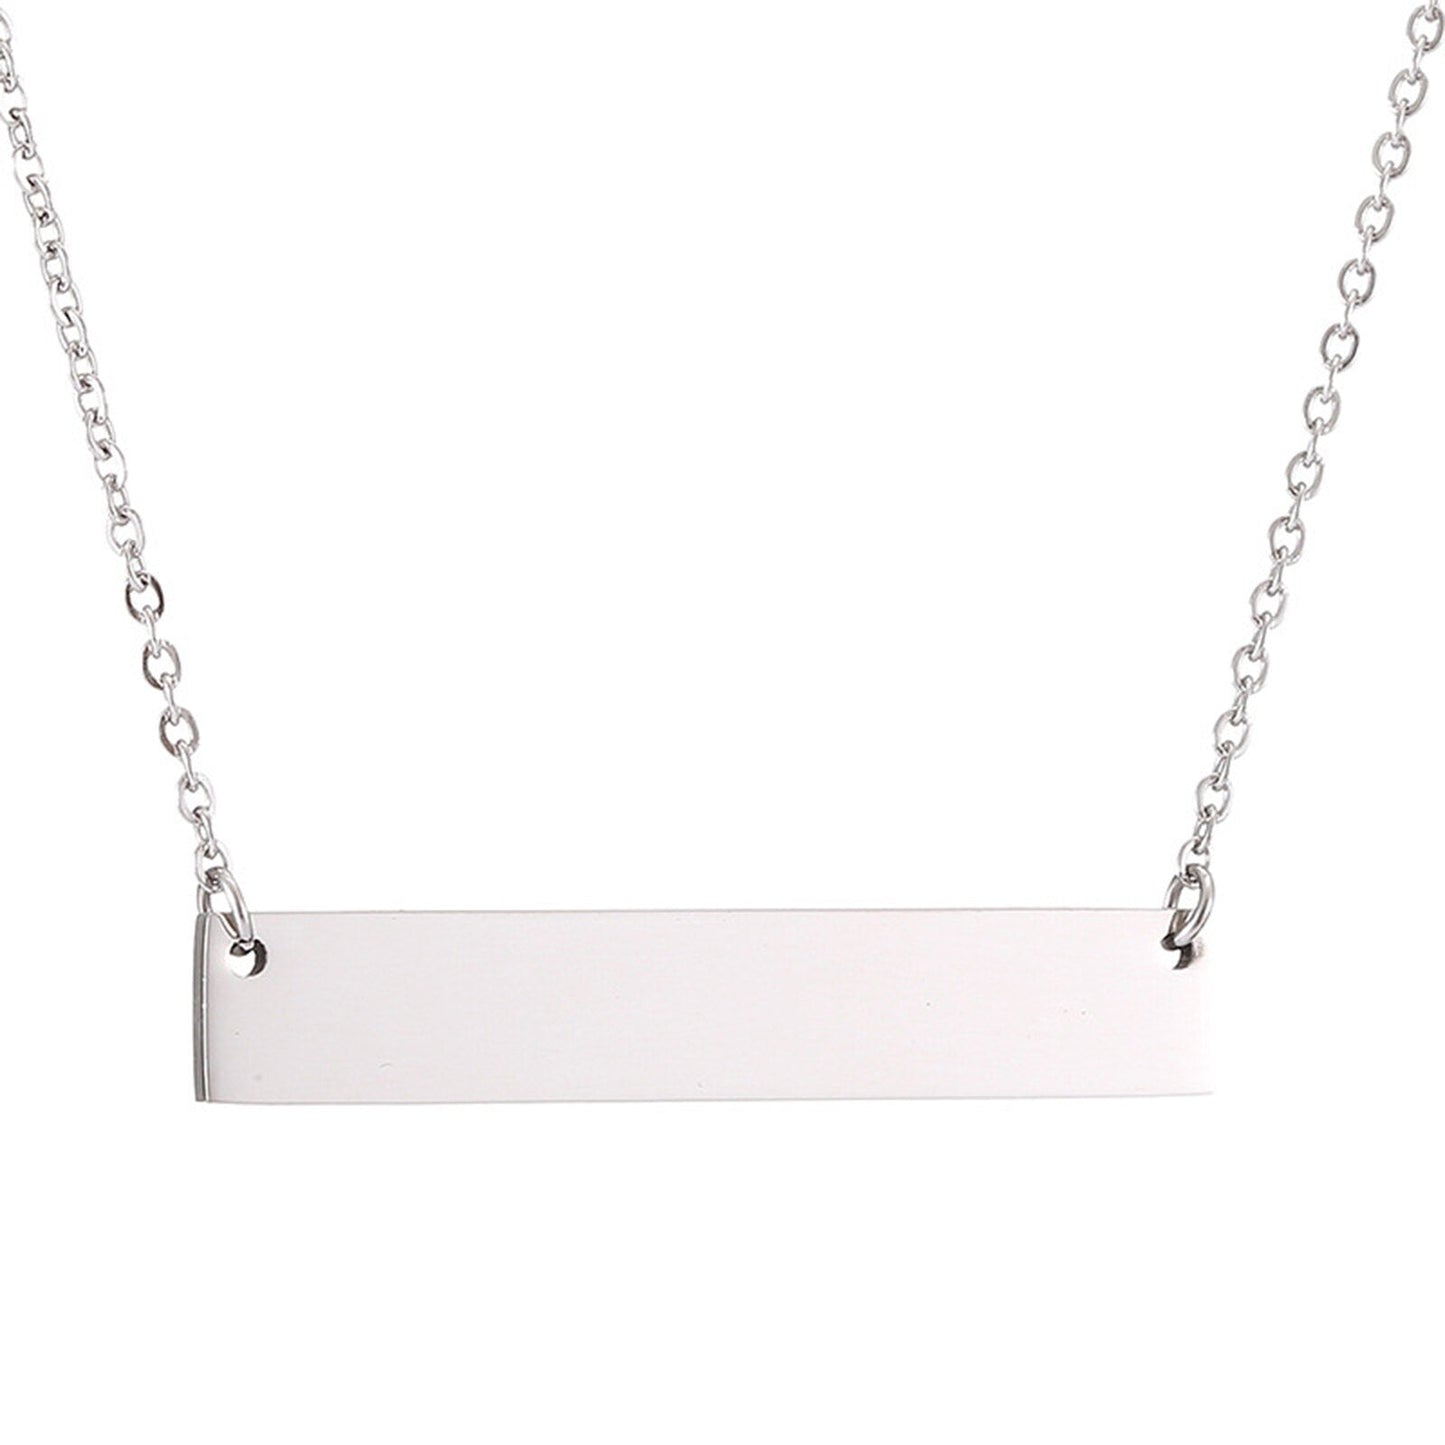 LABELED | Silver 30MM Horizontal Blank ID BAR Necklace